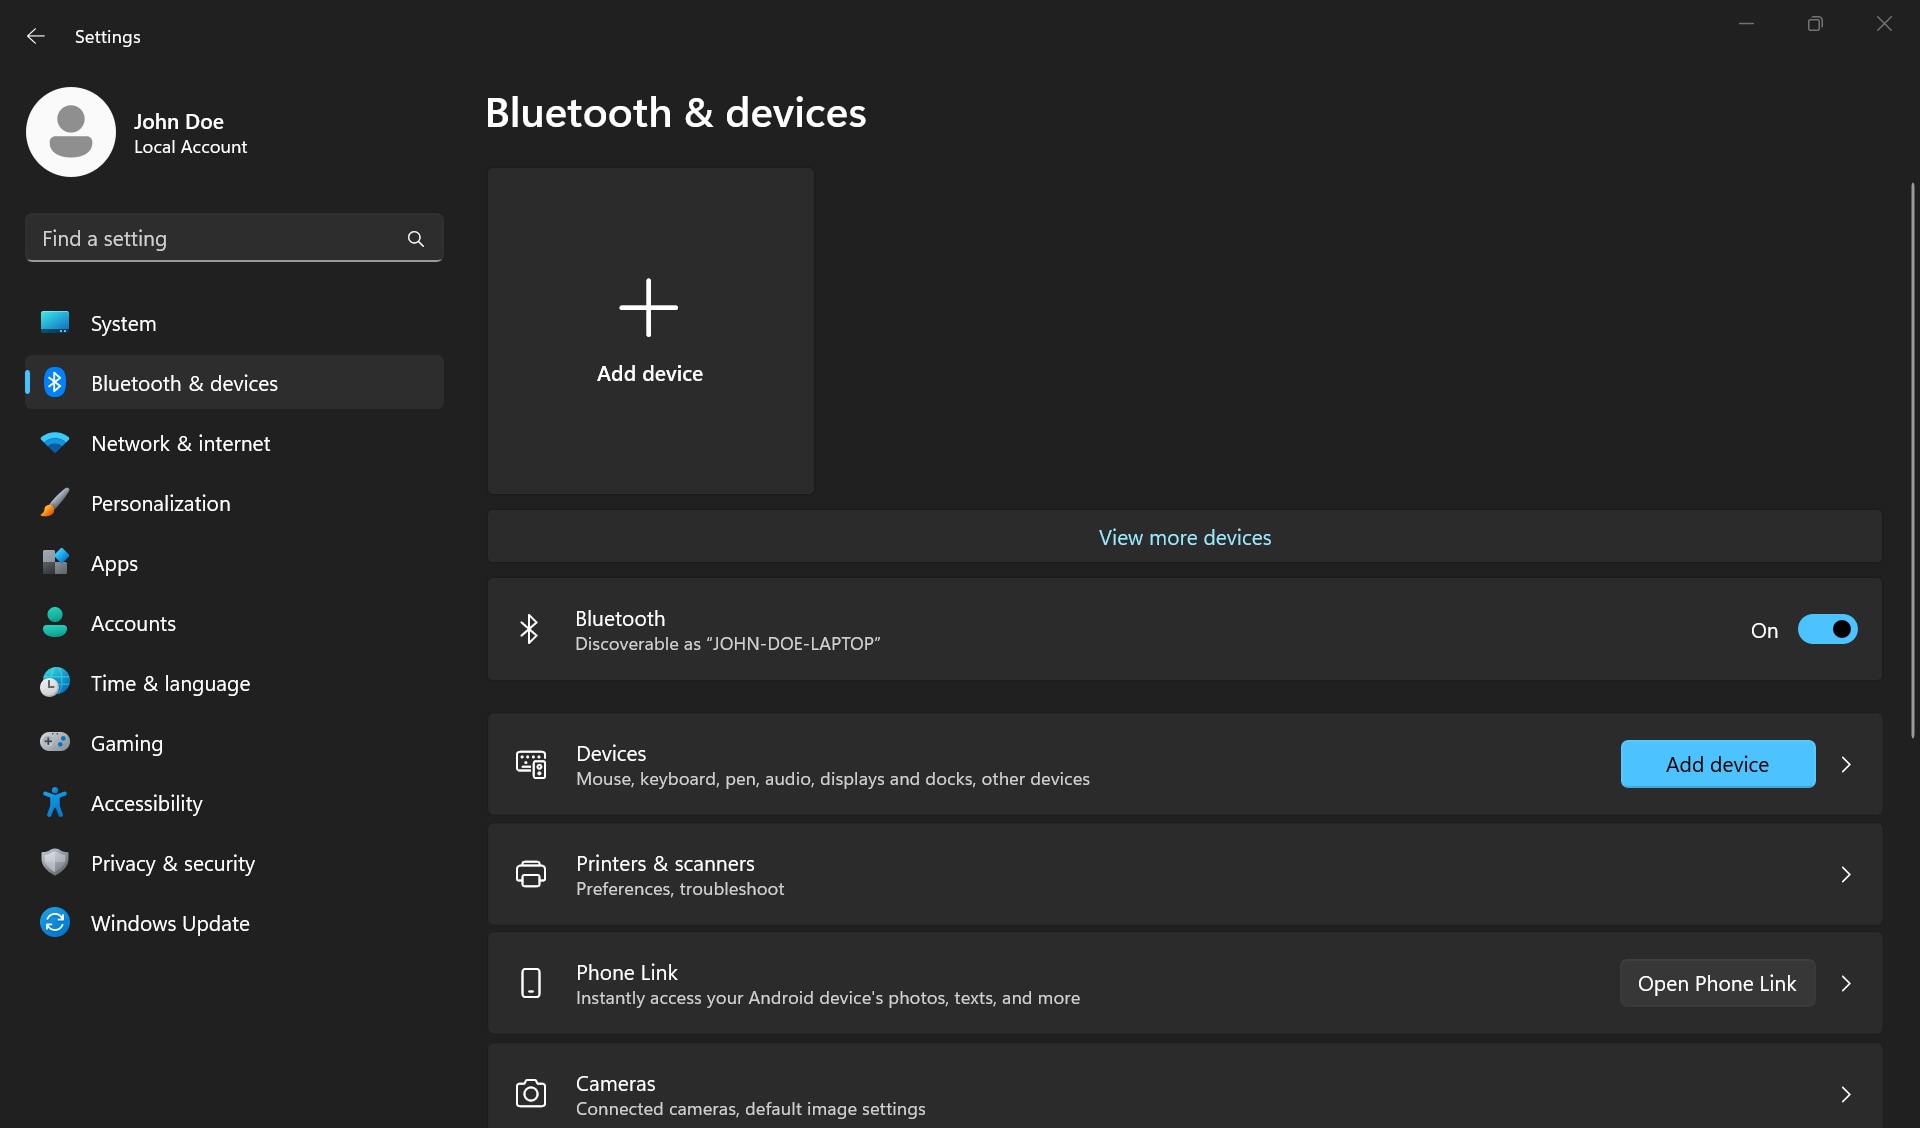 Add device button and Bluetooth on/off toggle under Bluetooth settings in Windows